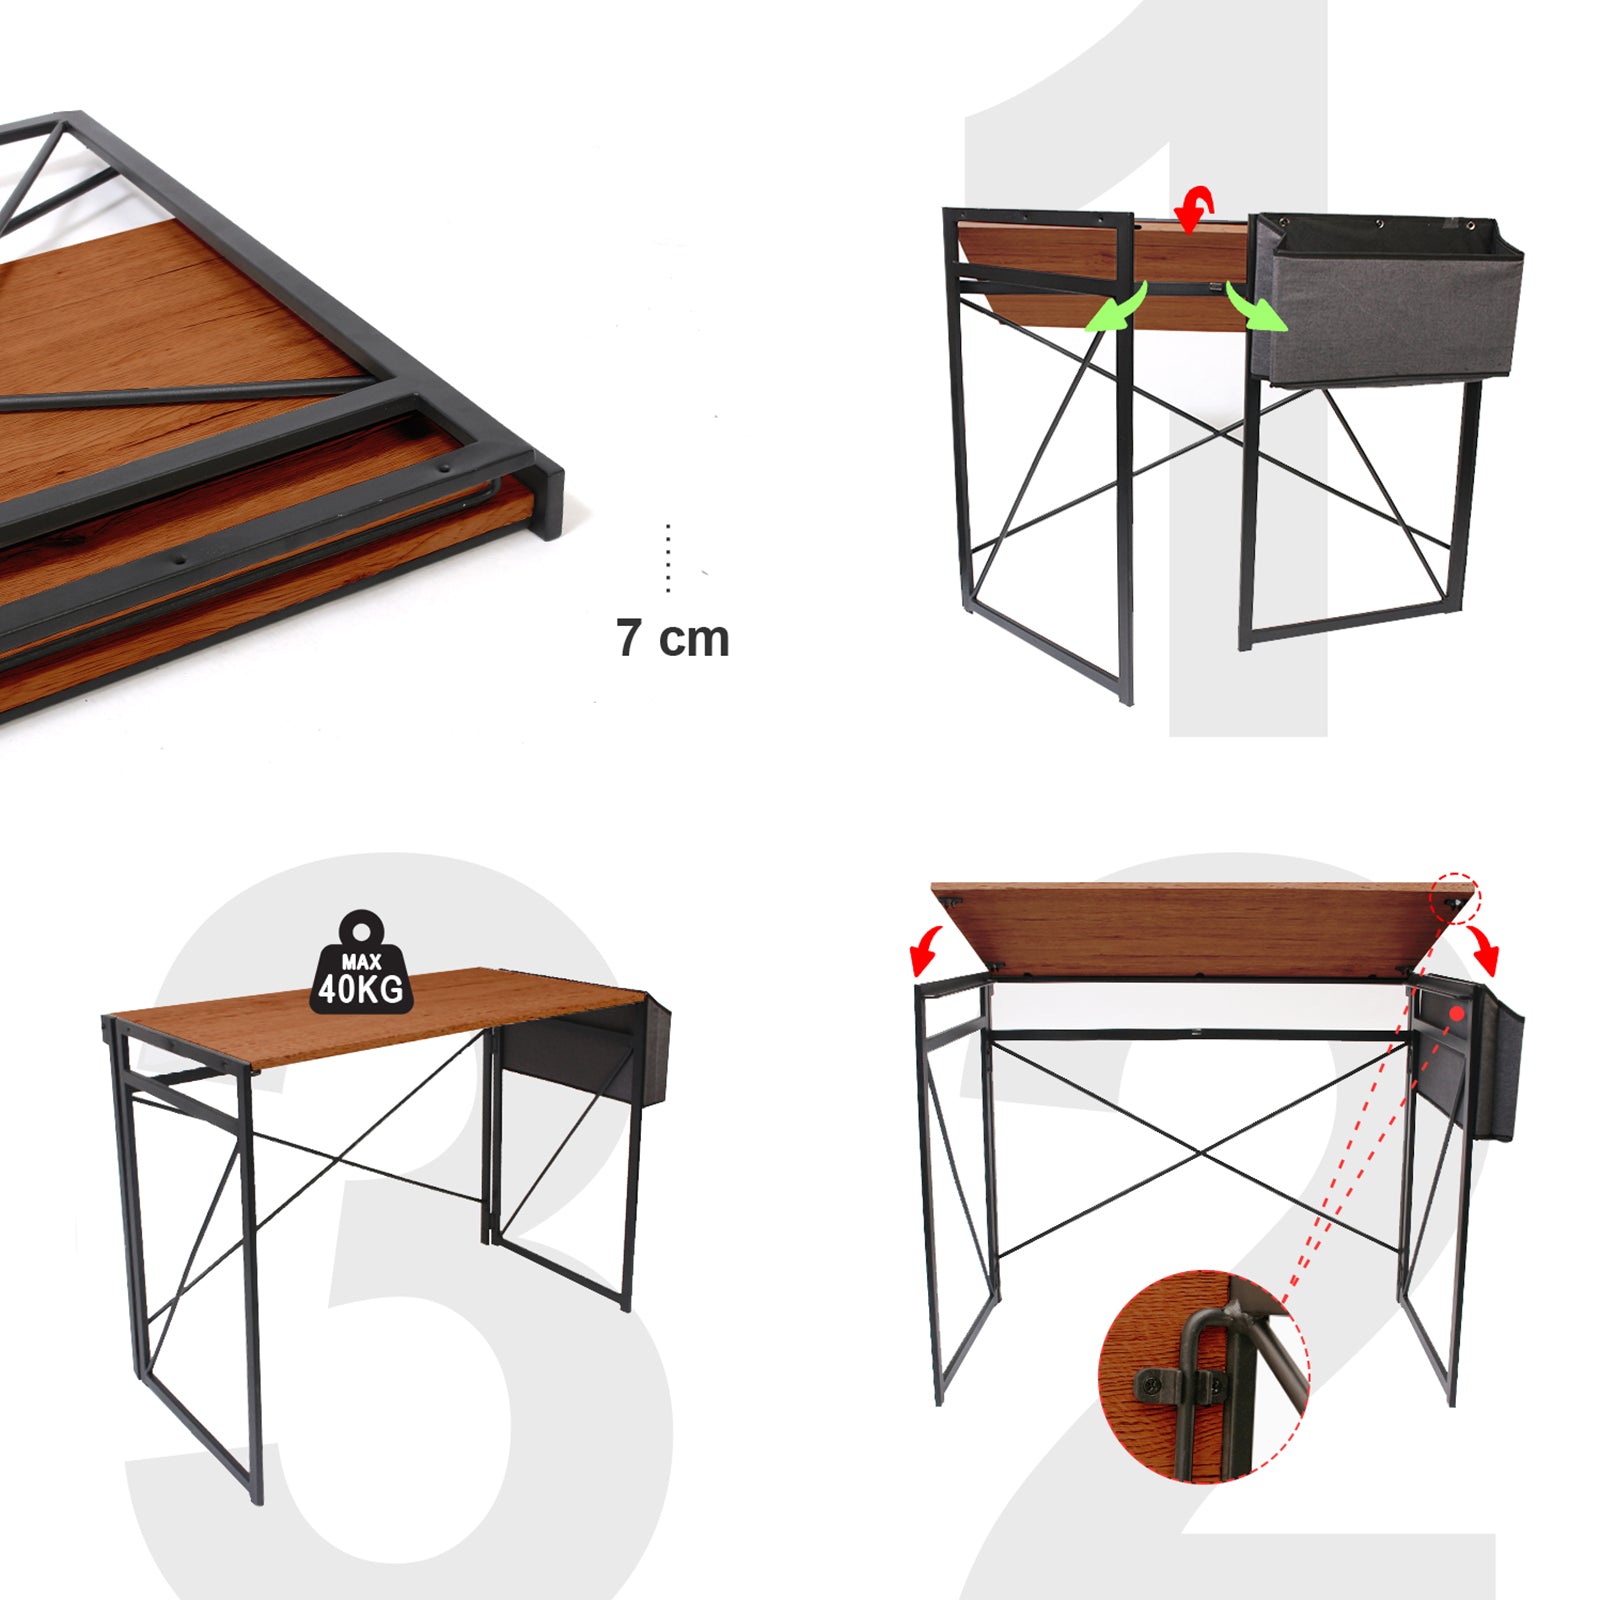 Todeco-Computer-Desk-Office-Table-with-Storage-Pouch-Foldable-Computer-Desk-Industrial-Style-Study-Table-Desk-Workstation-Brown